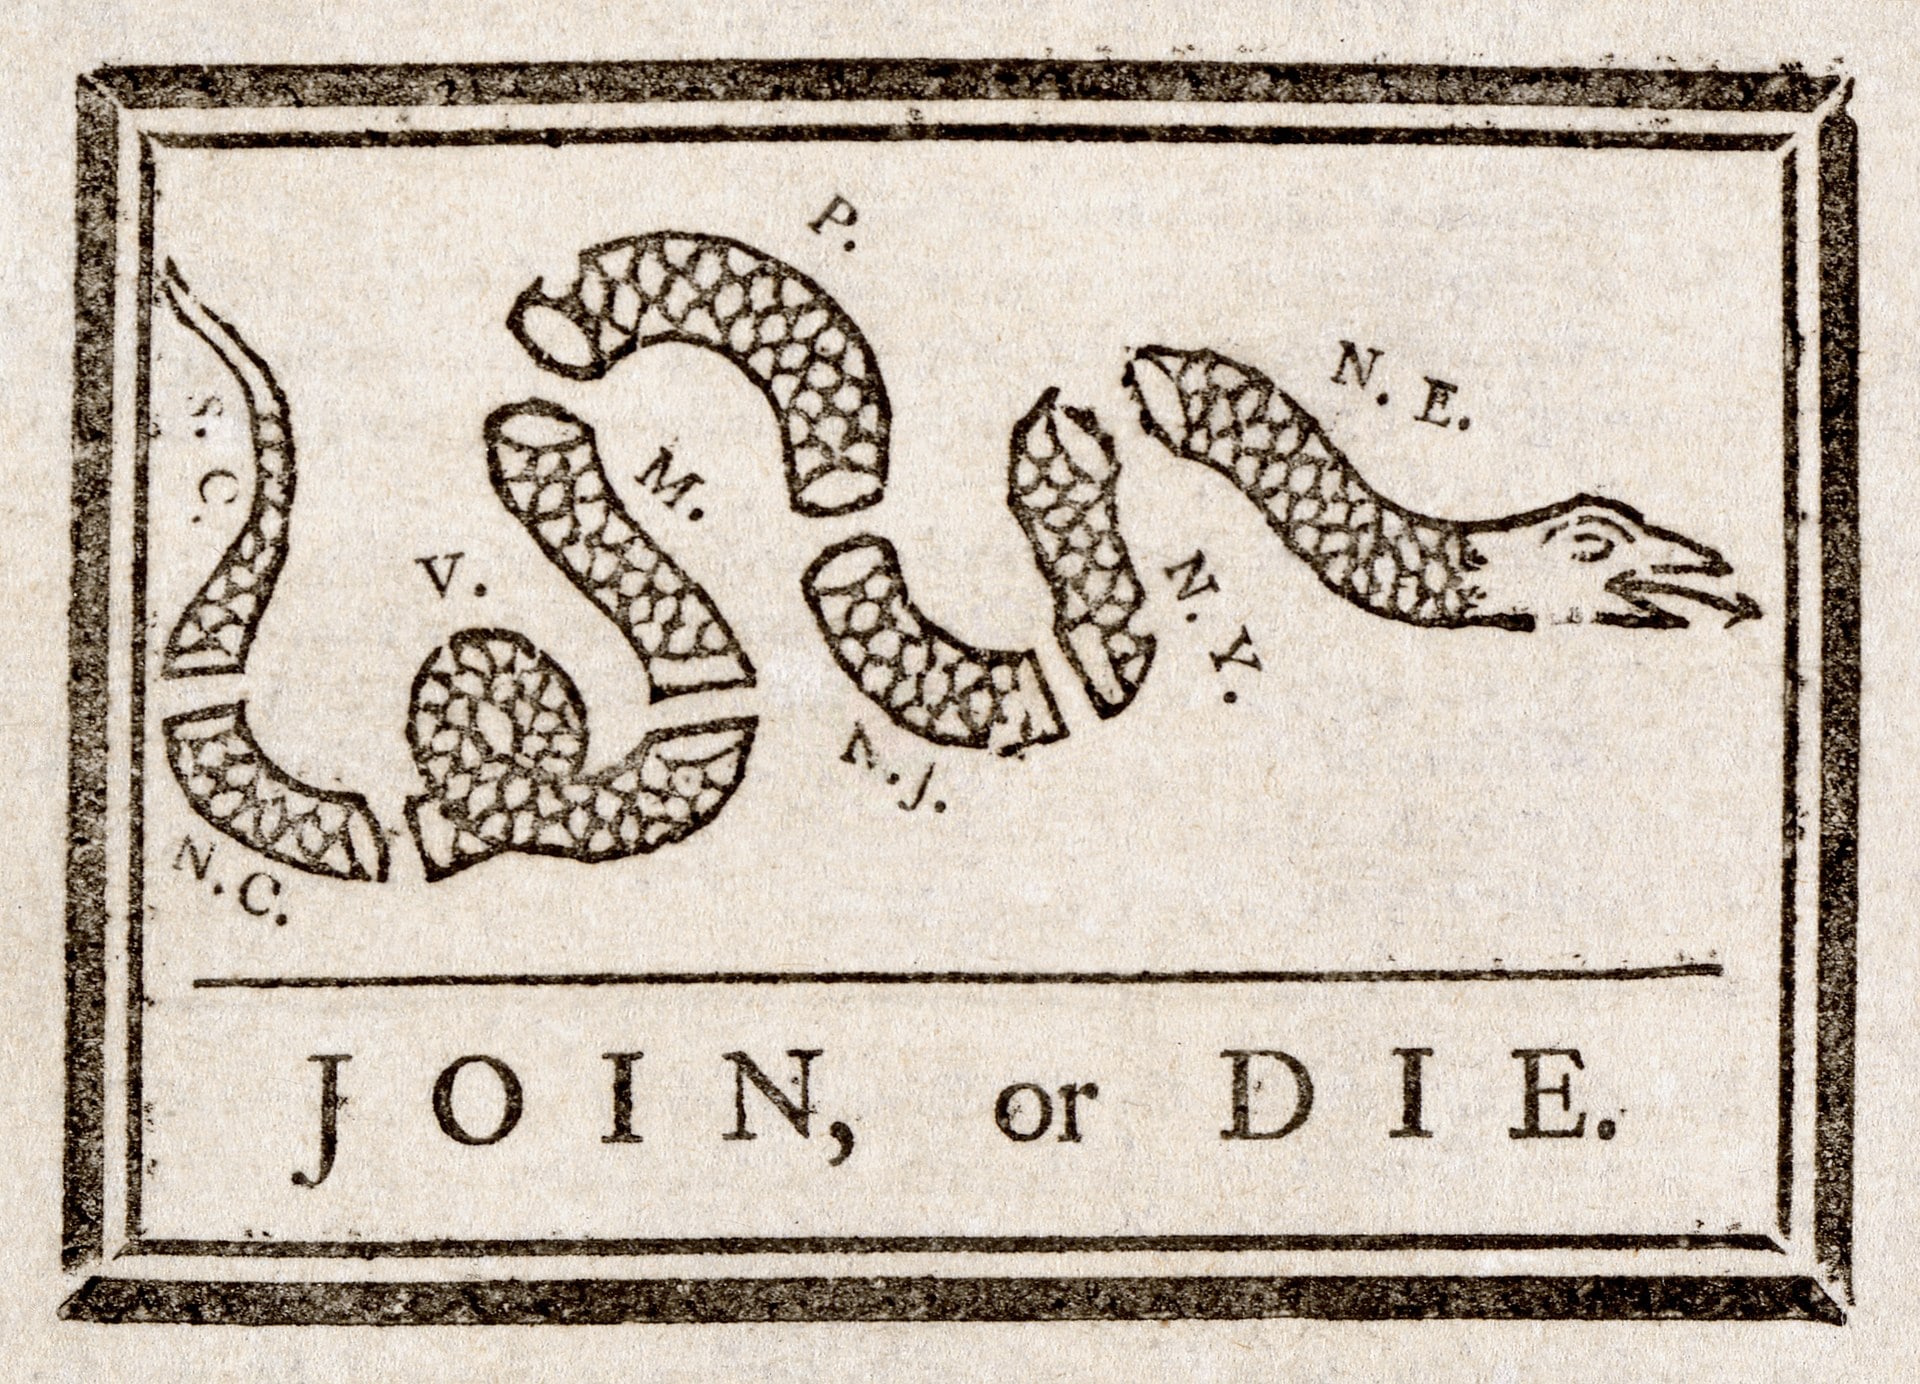 Join, or Die political cartoon, shows a rattlesnake dissected into eight pieces.